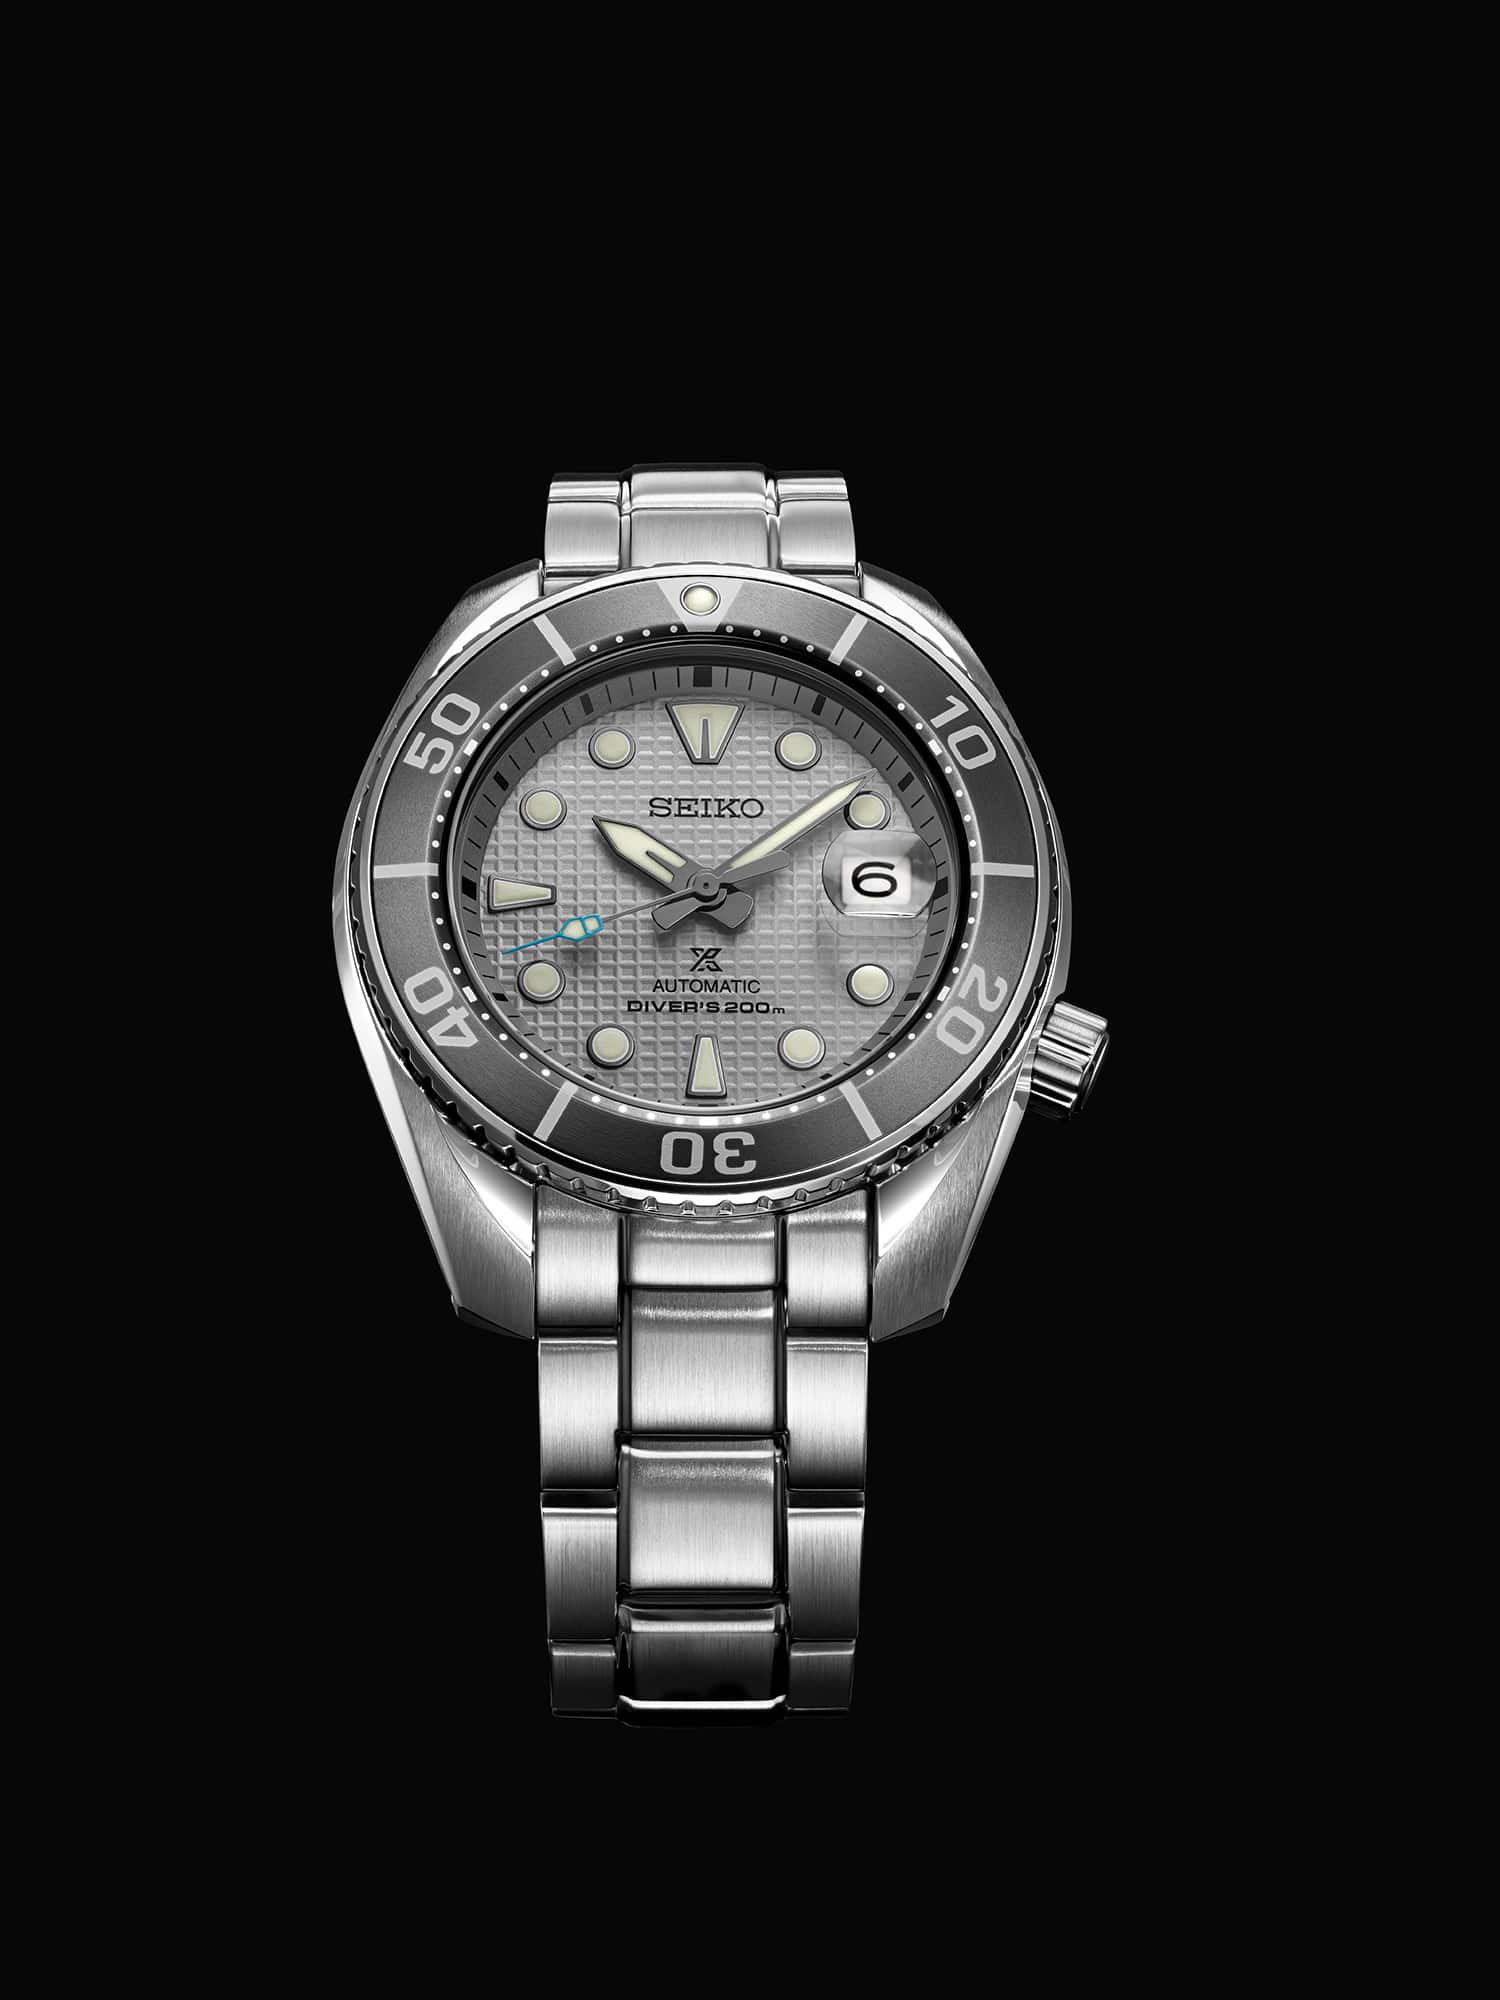 Seiko Prospex Ice Diver Watch Release Hypebeast | vlr.eng.br